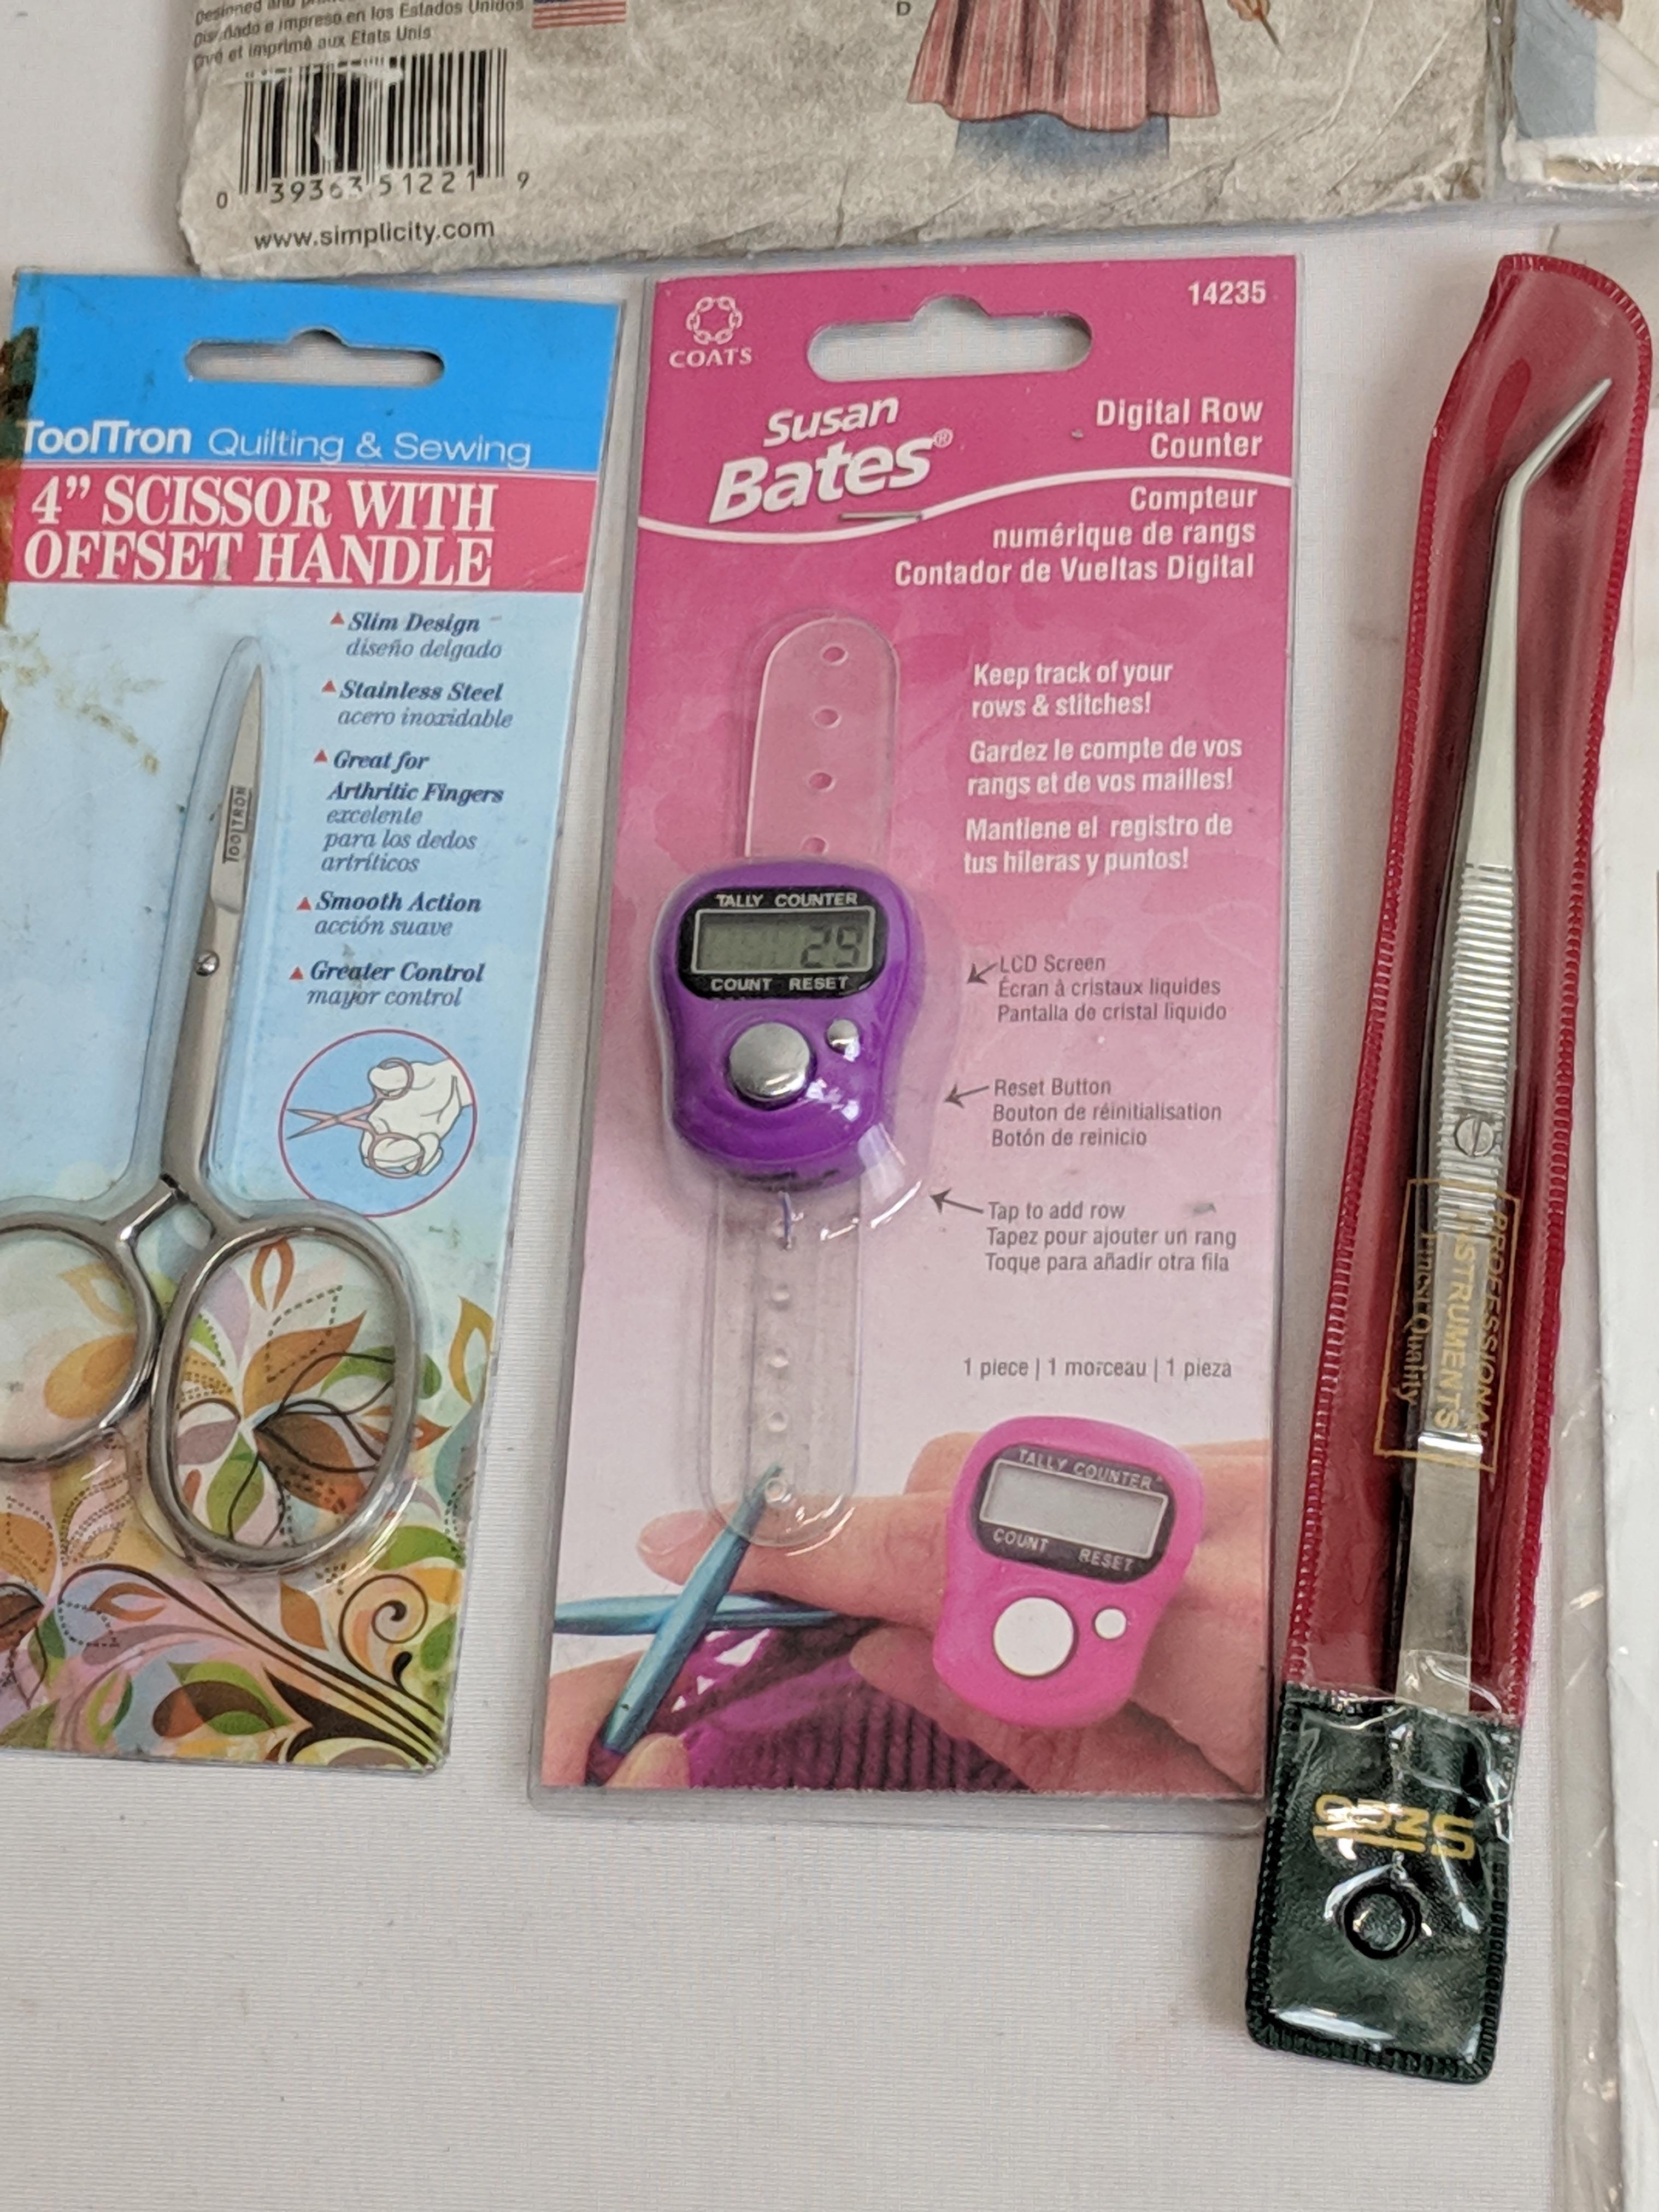 Sewing/Embroidery/Knitting Items, Patterns, Embroidery Ruler, Scissors, Digital Row Counter